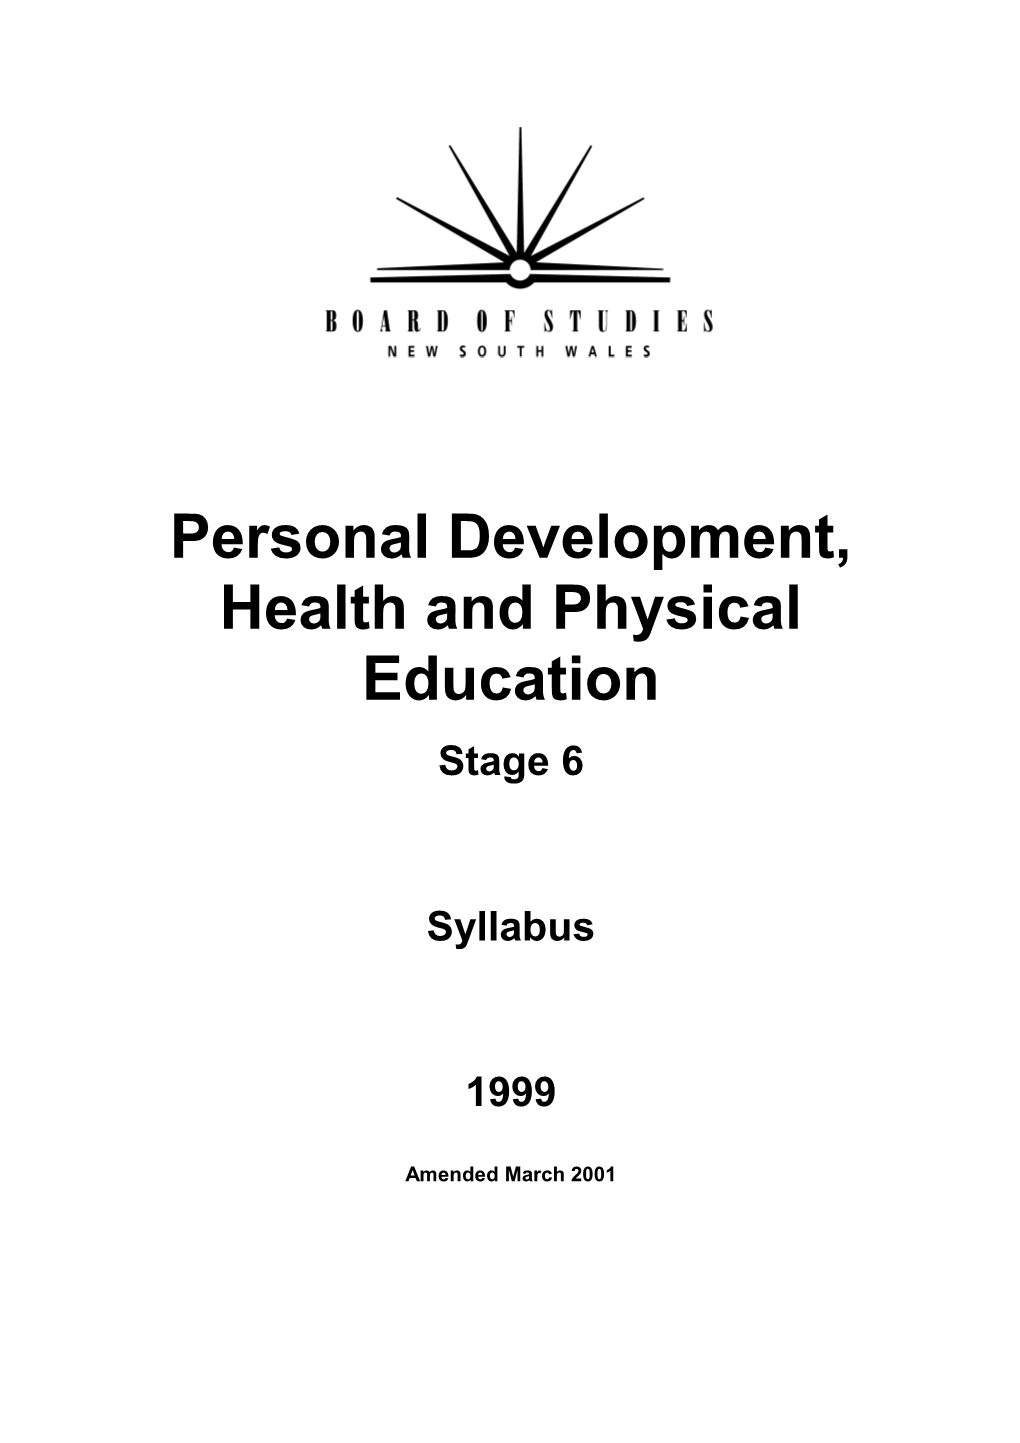 Personal Development, Health and Physical Education